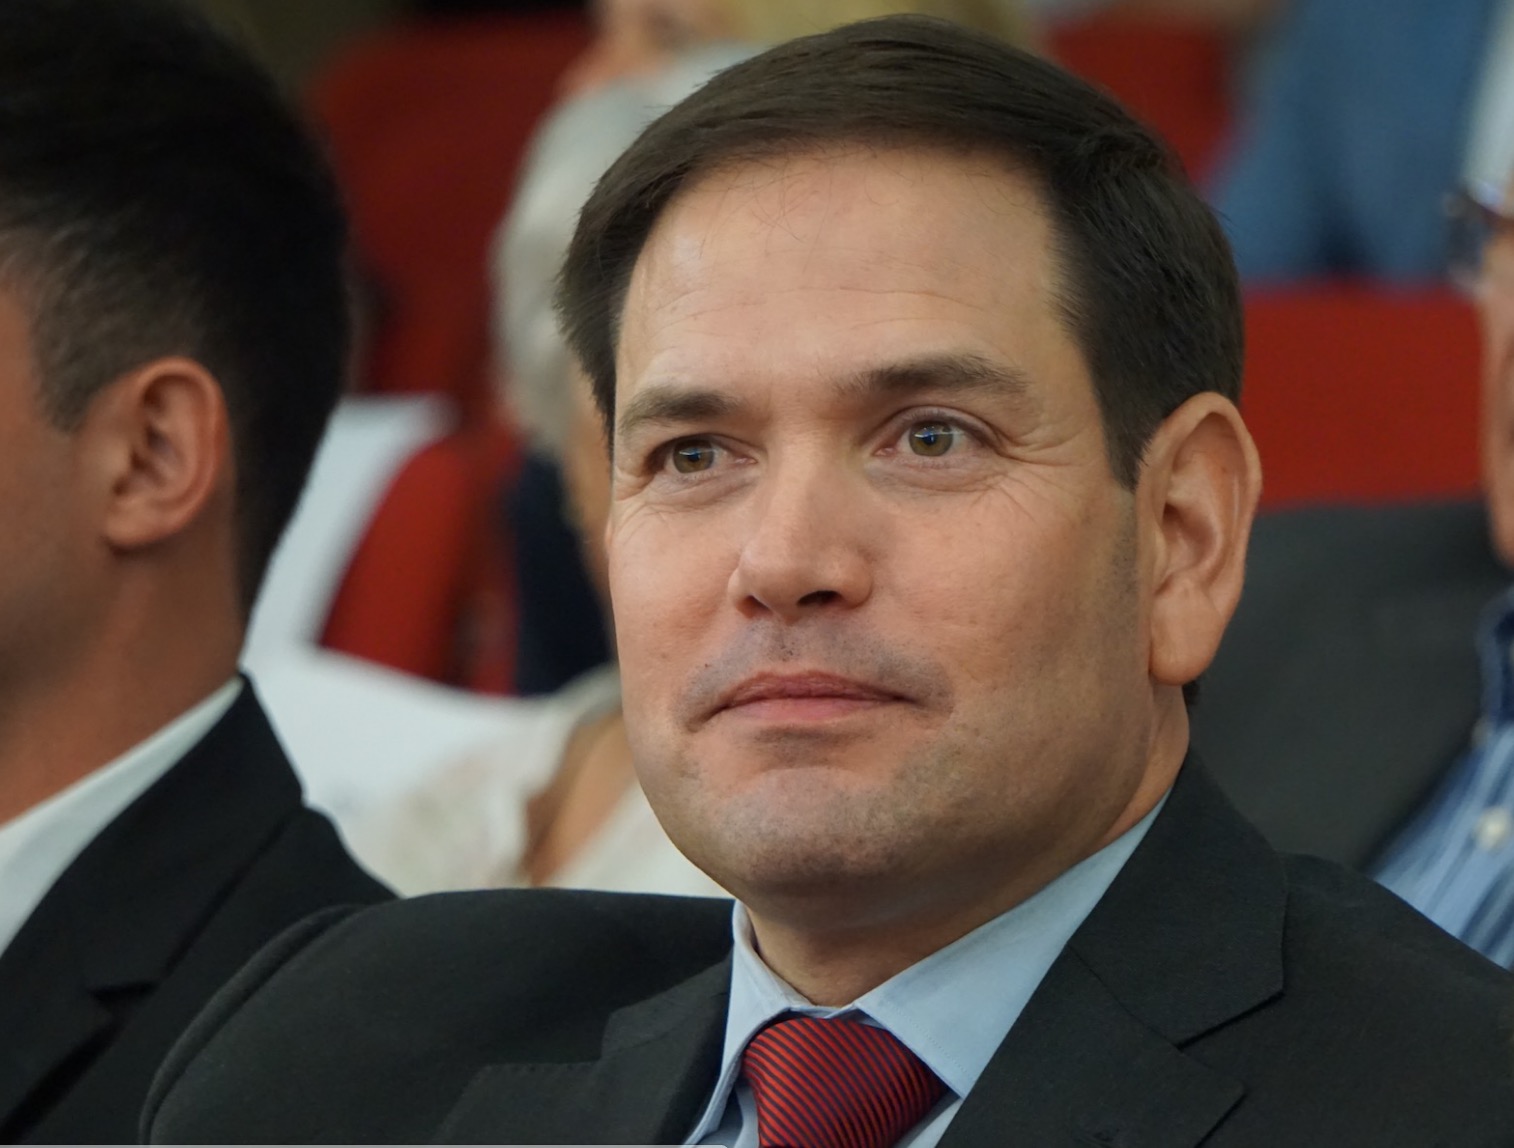 Rubio Remains Optimistic for Cuba, Calls for End to Regime [Video]